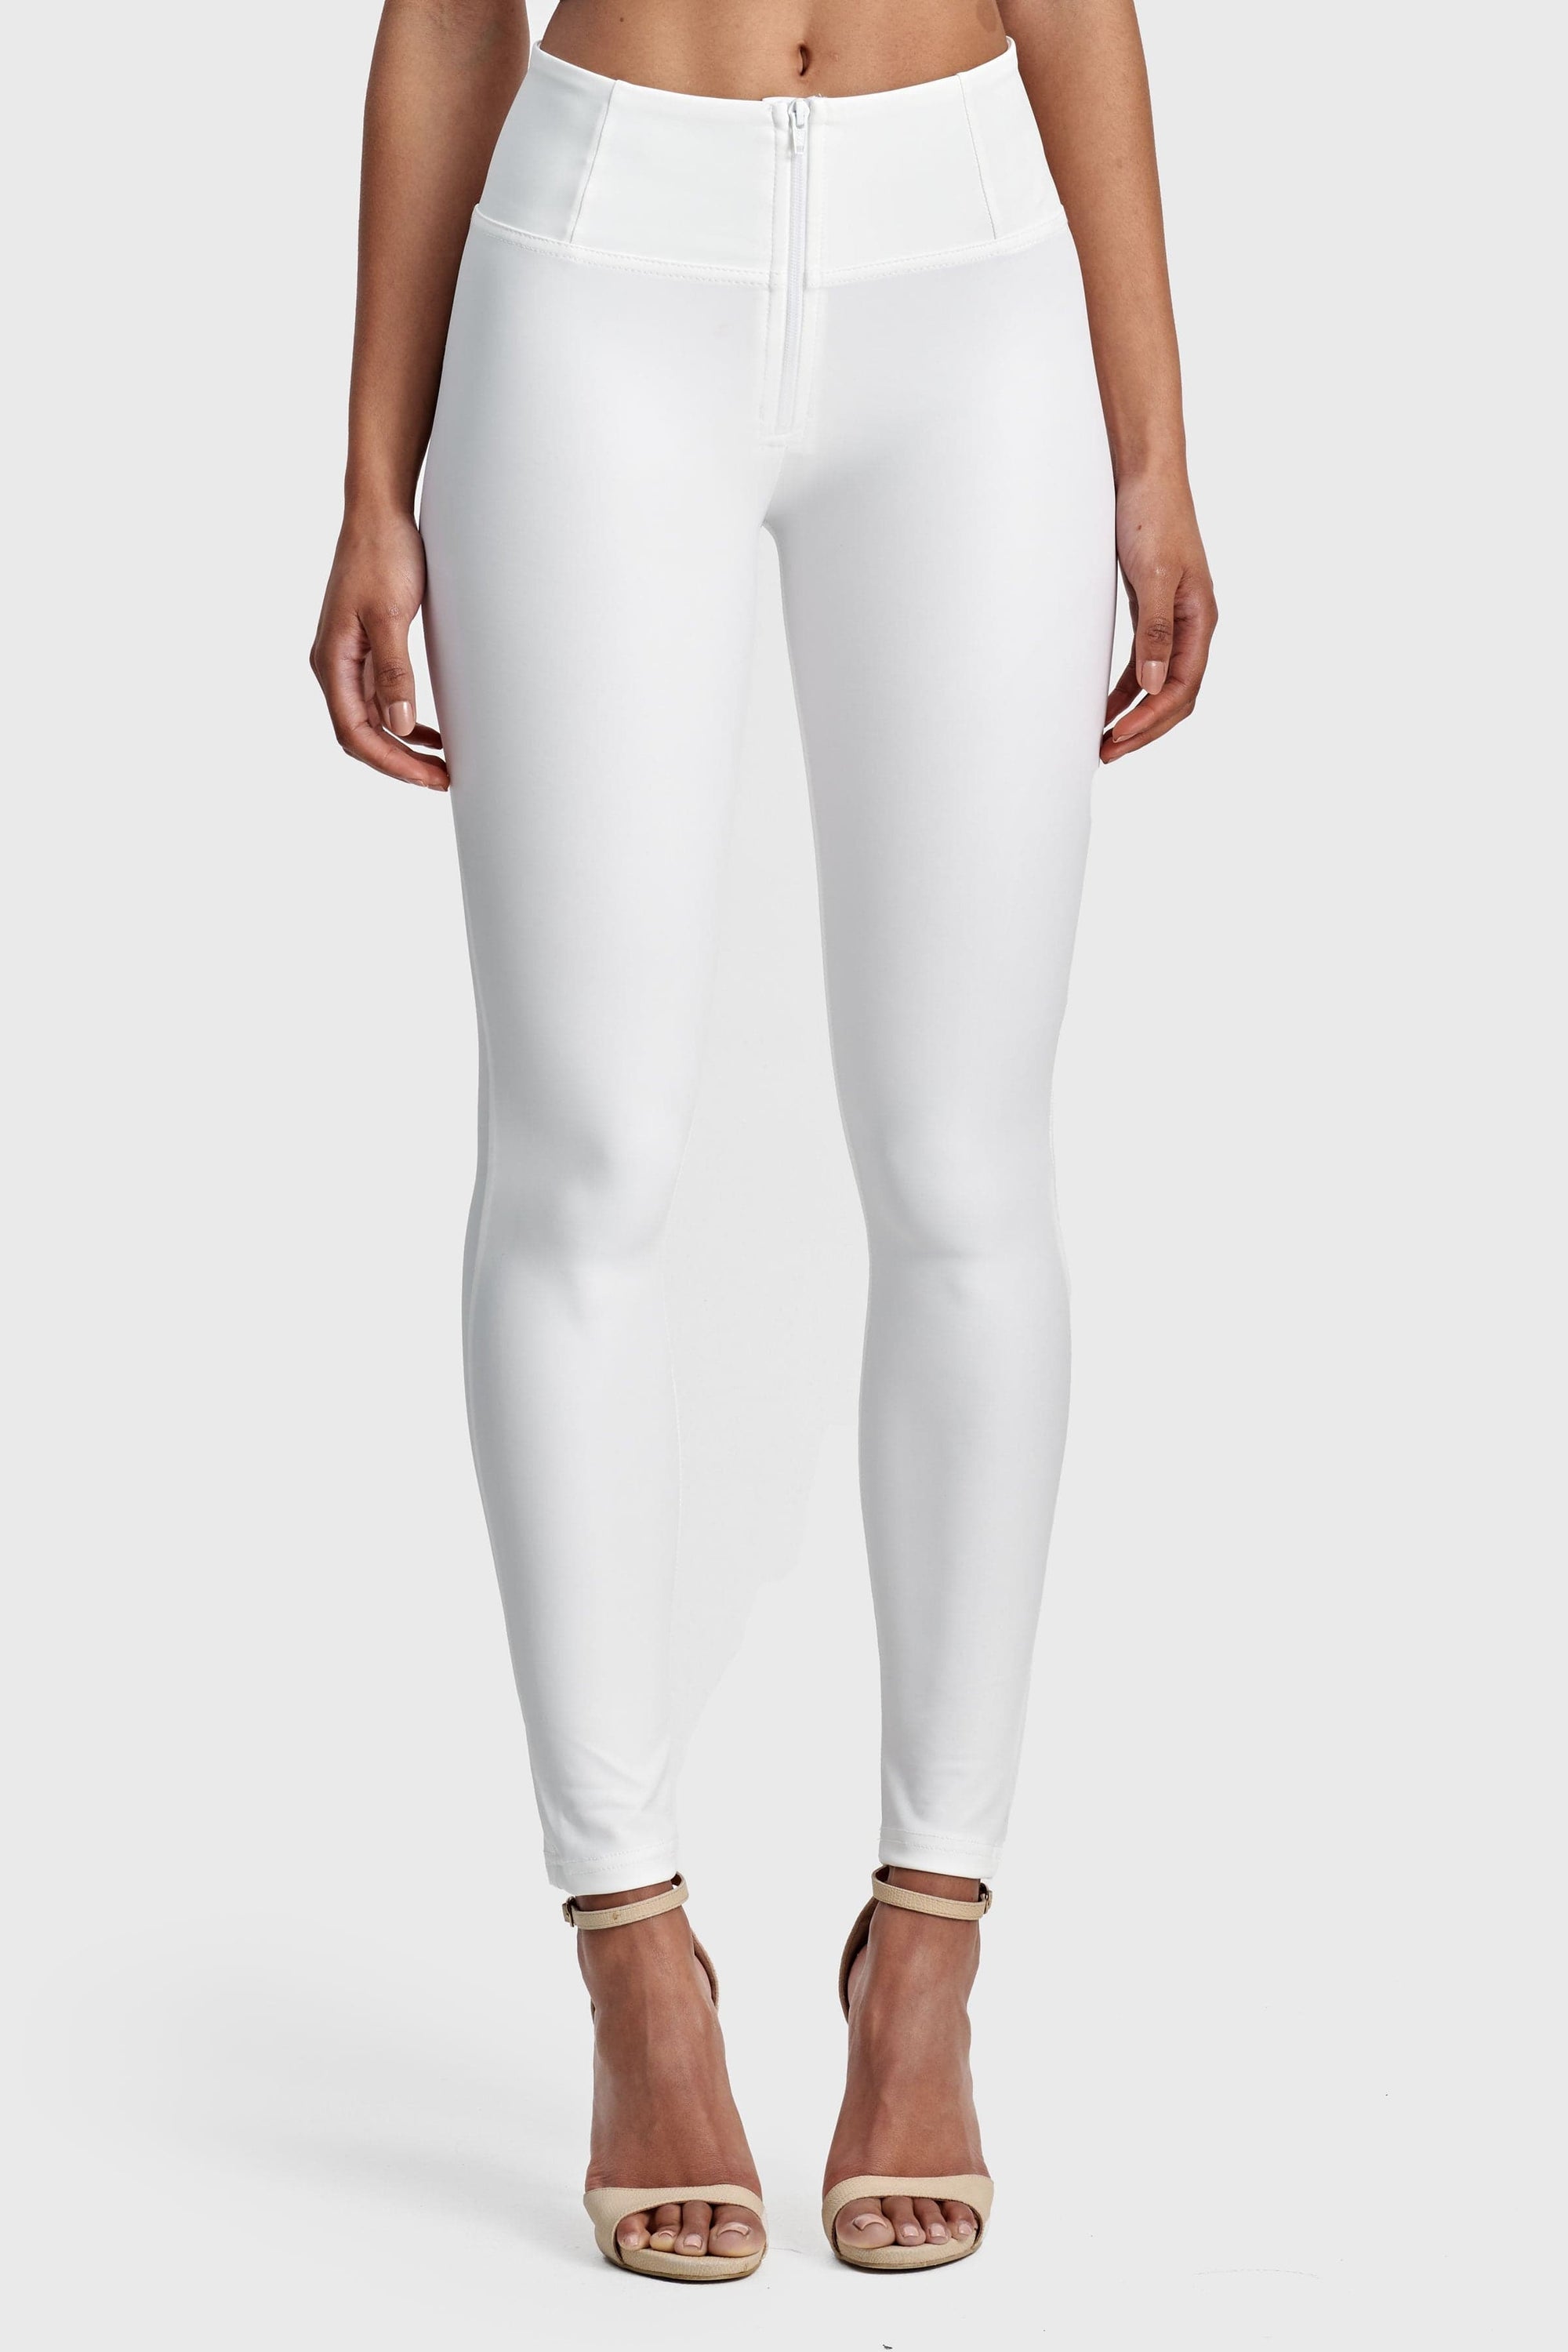 WR.UP® Faux Leather - High Waisted - Full Length - White 13